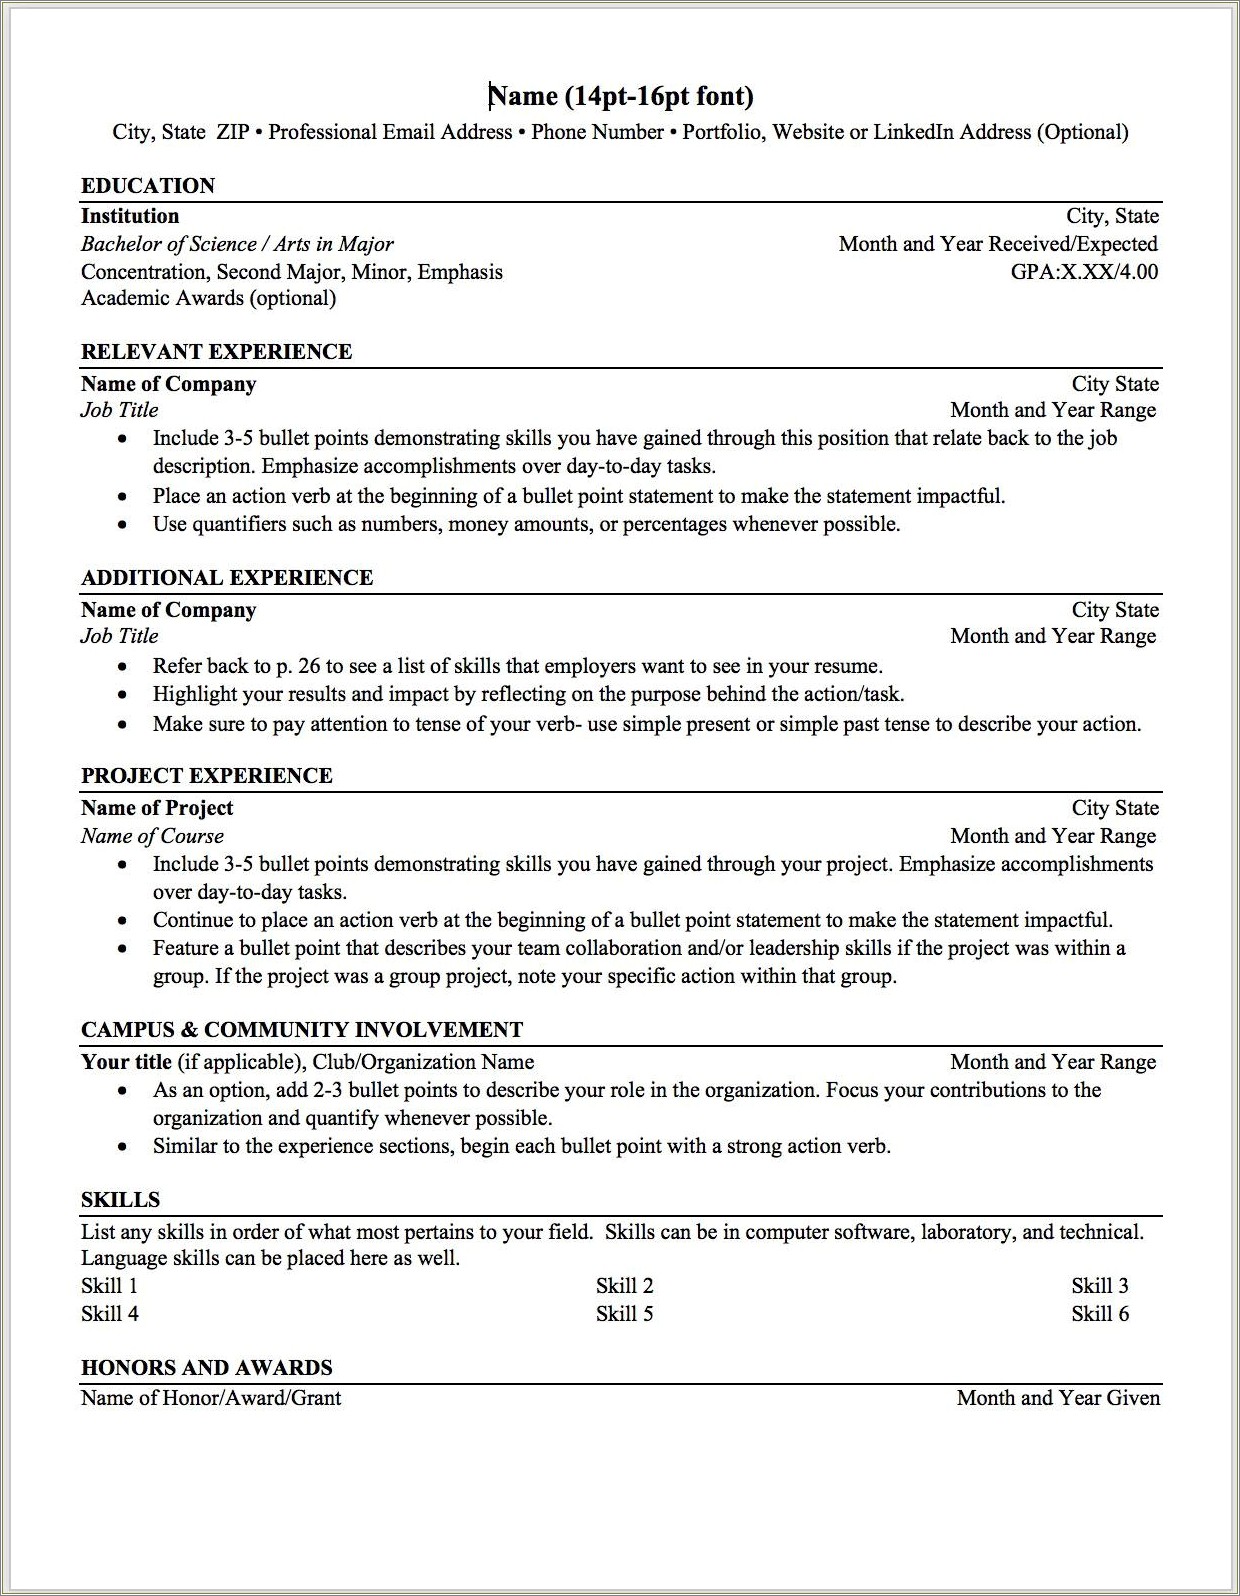 Order Of Experience On Resume Current Job